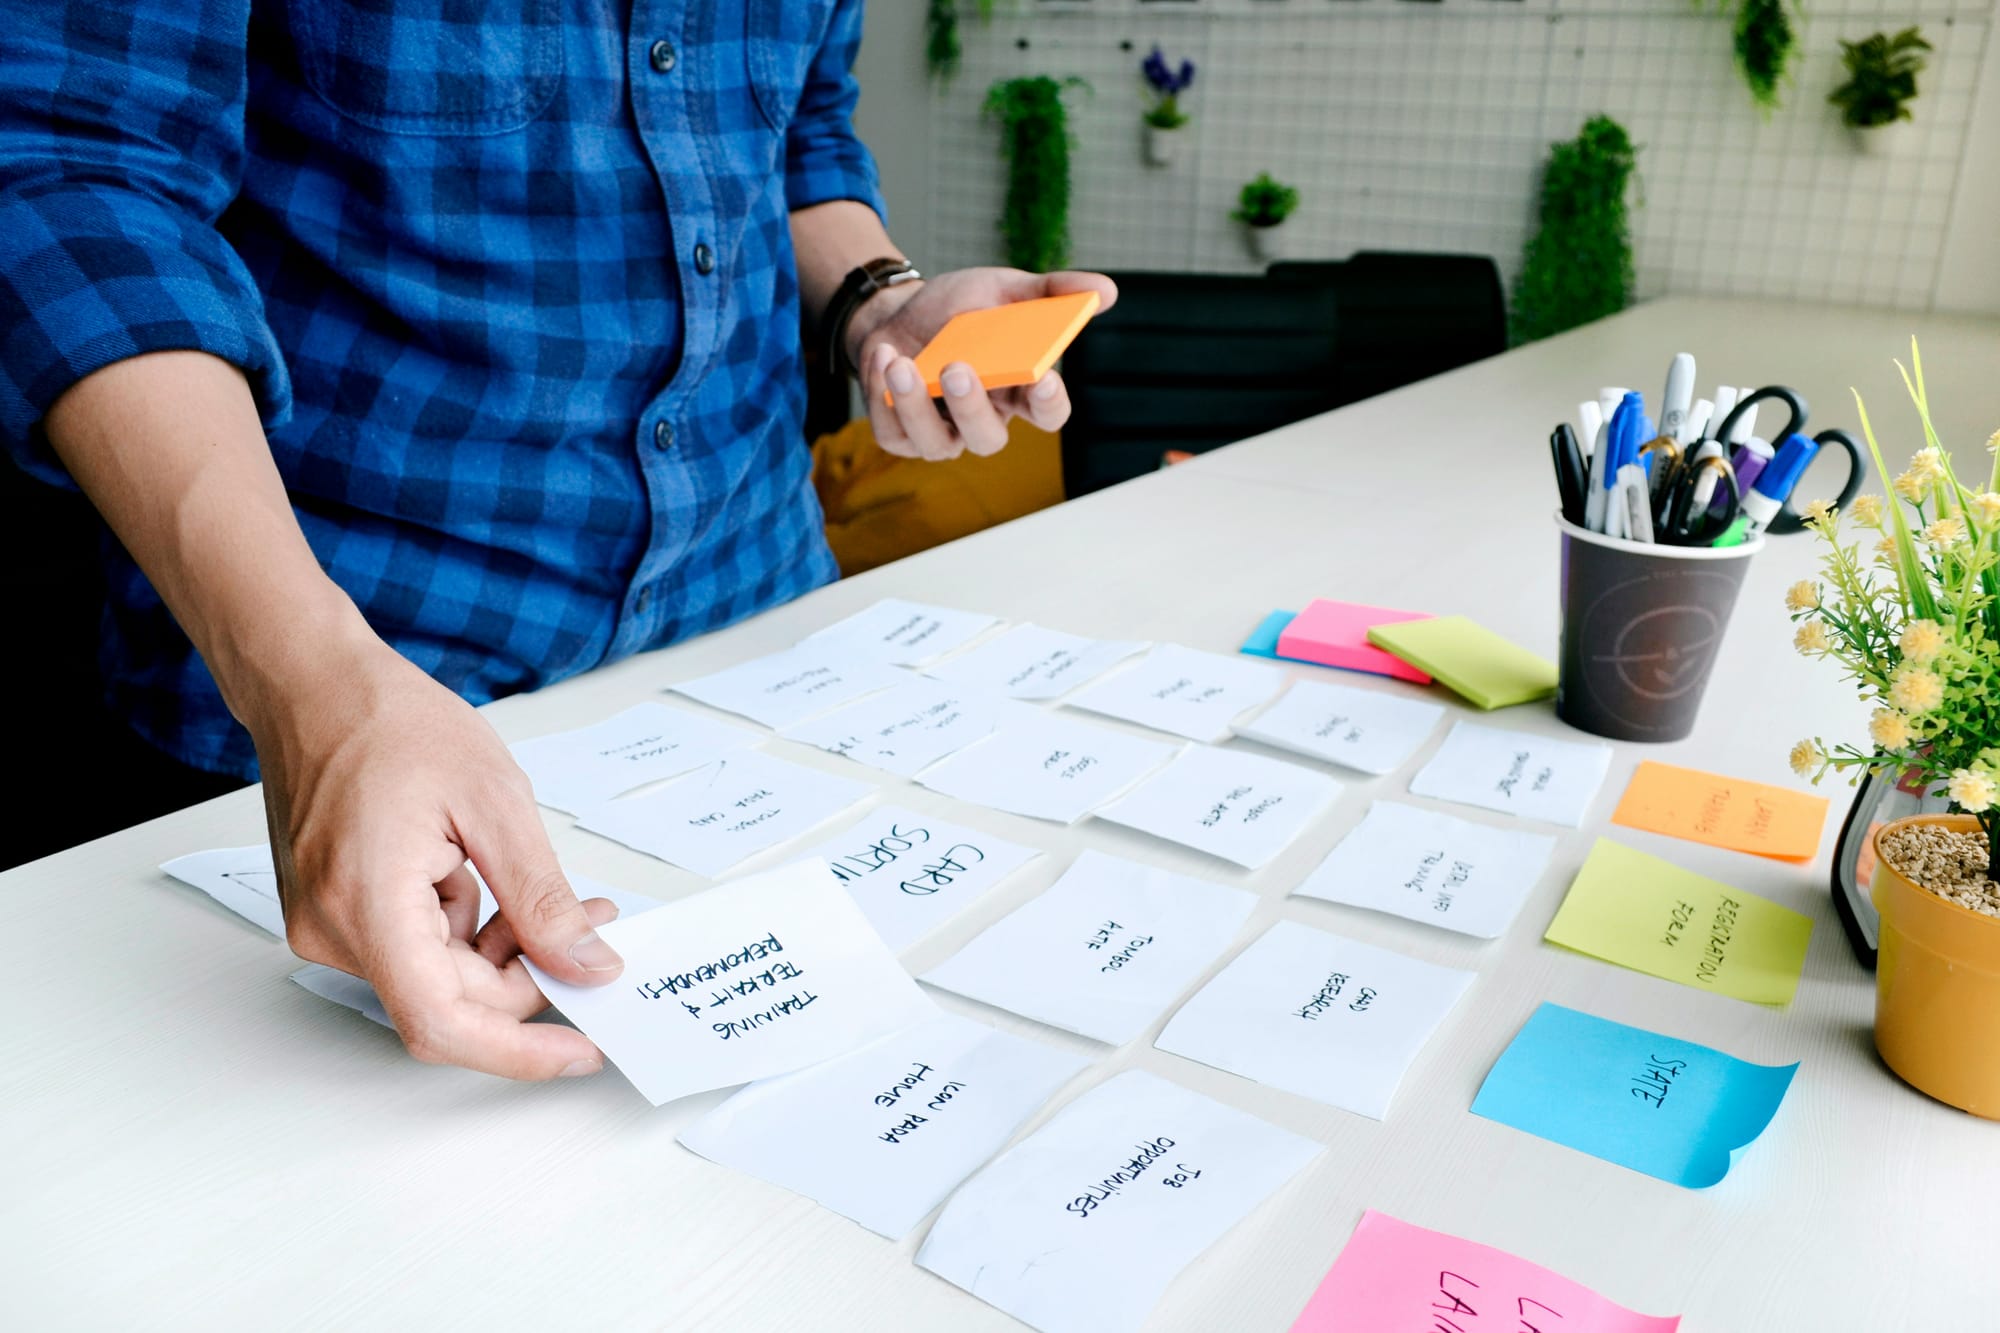 man arranging sticky notes according to priority - content marketing workflows